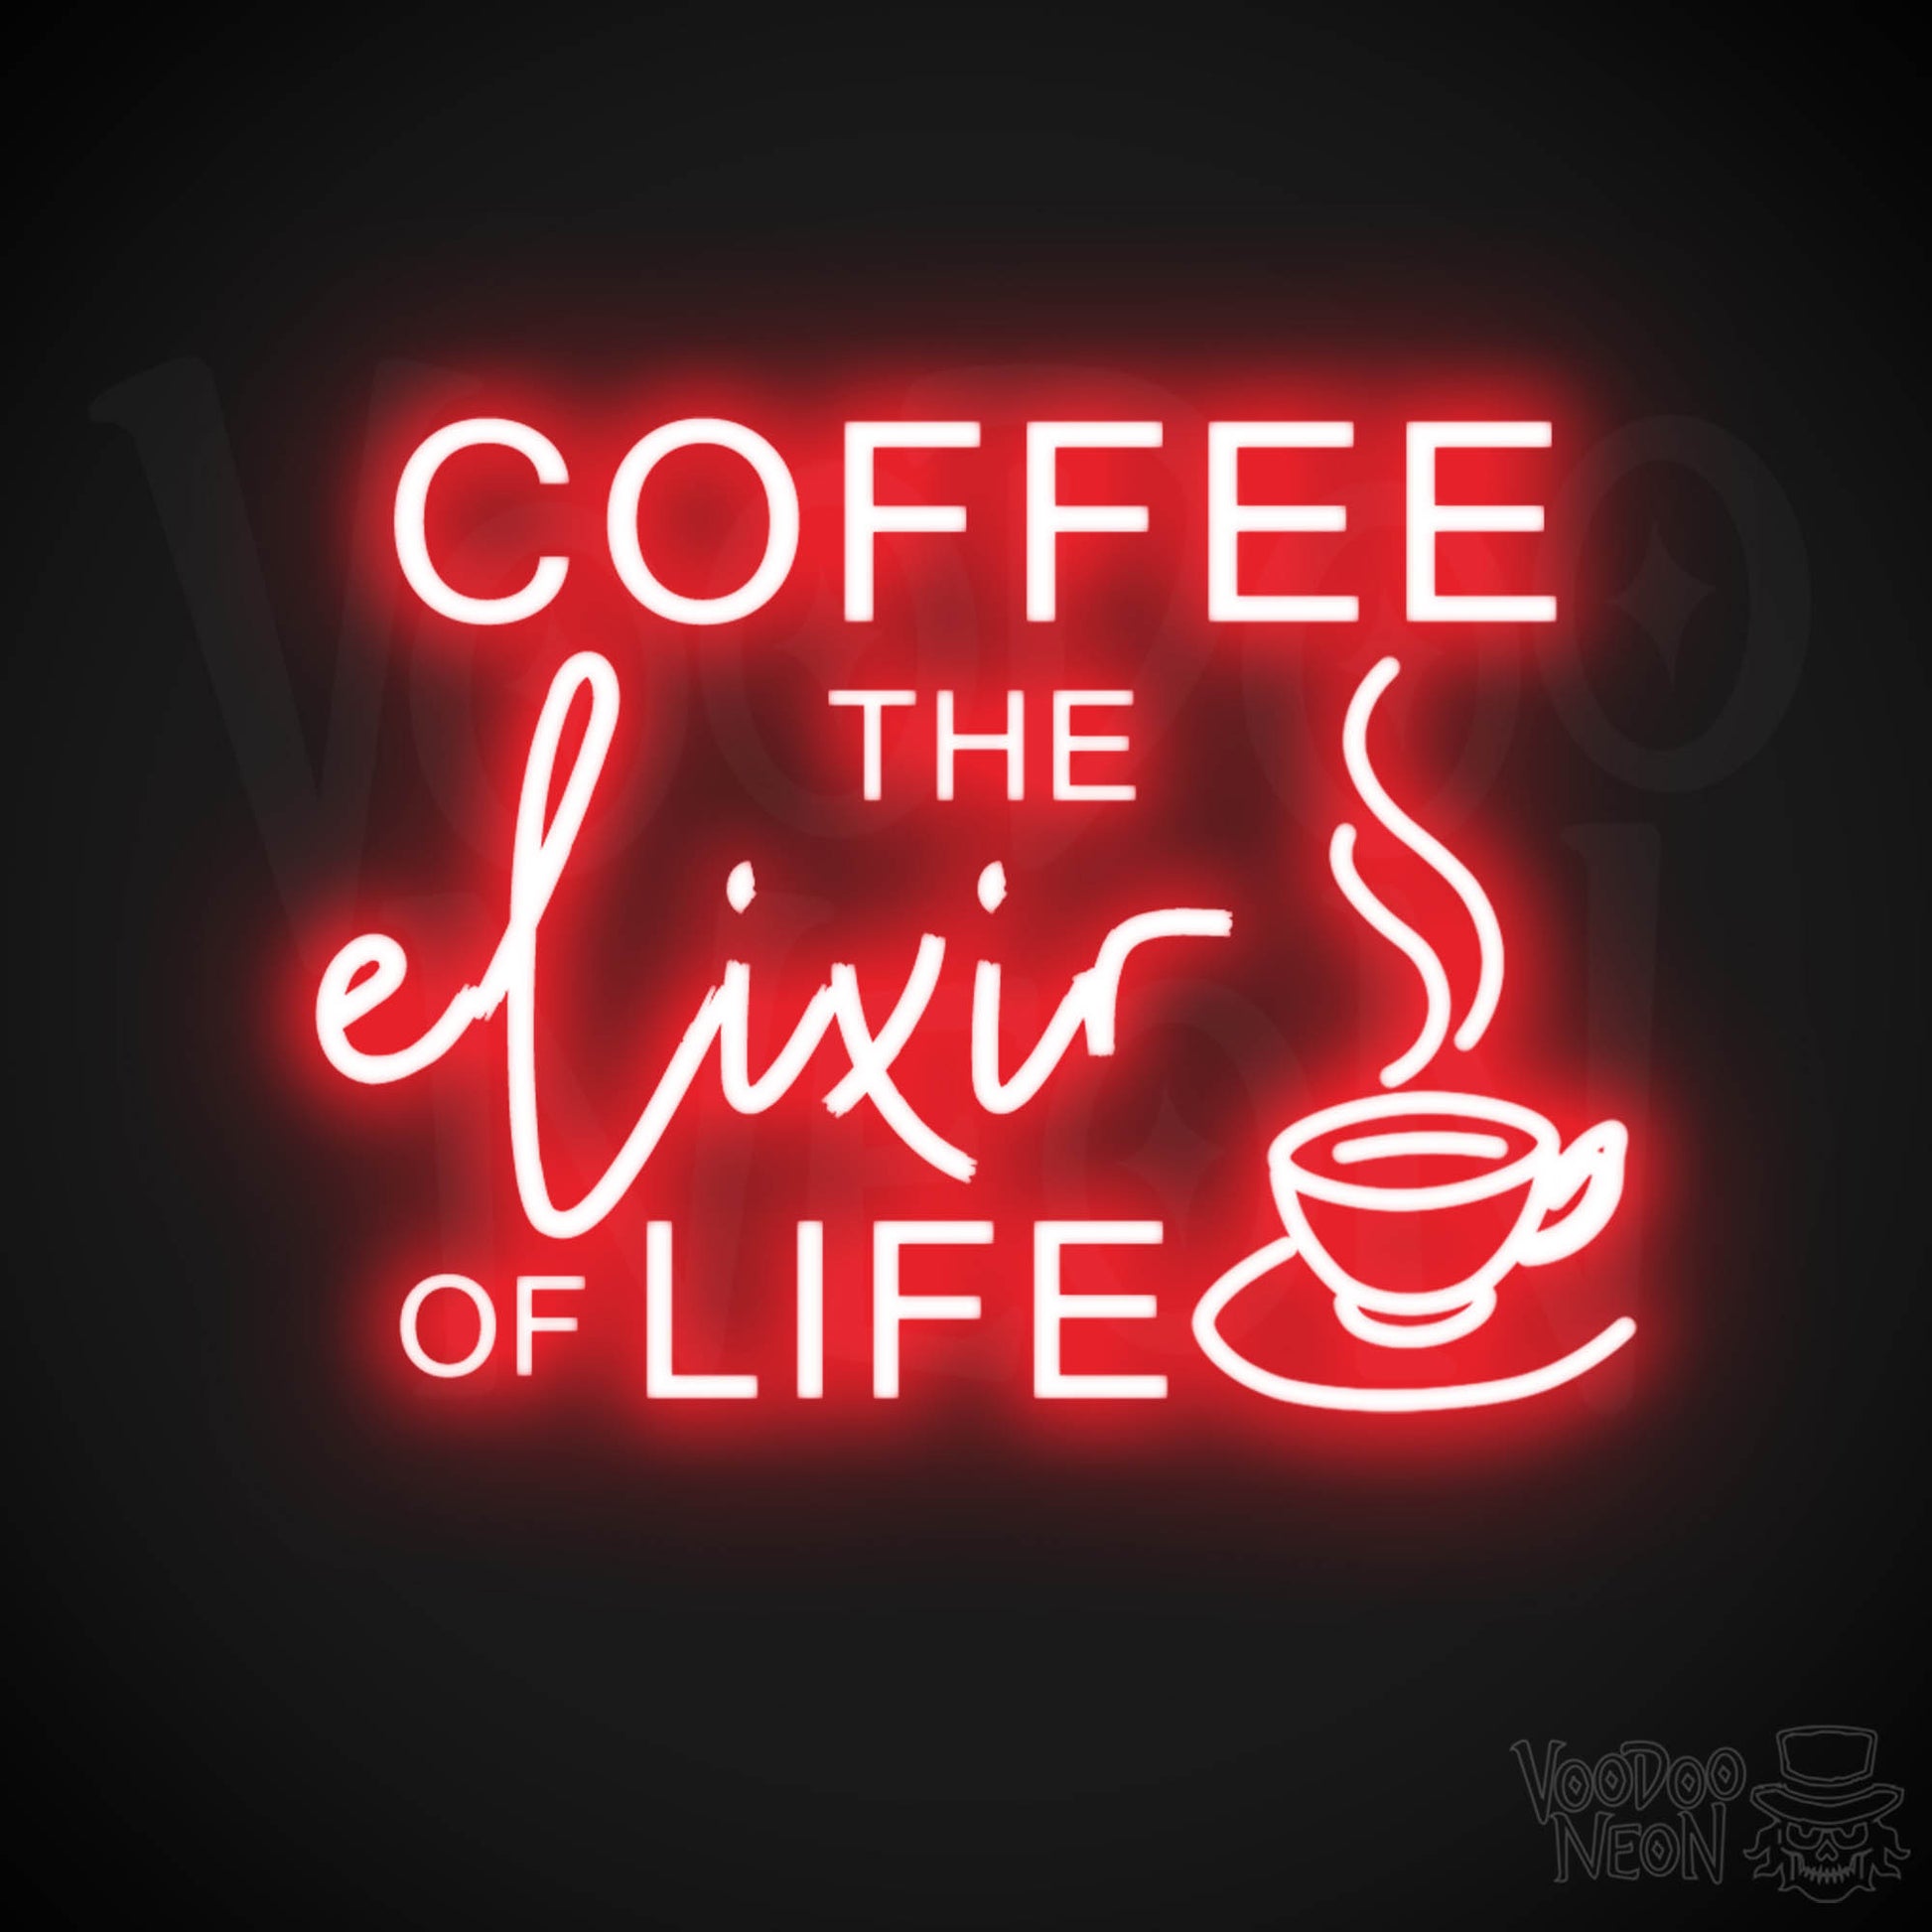 Coffee - The Elixir Of Life Neon Sign - The Elixir Of Life Sign - Color Red